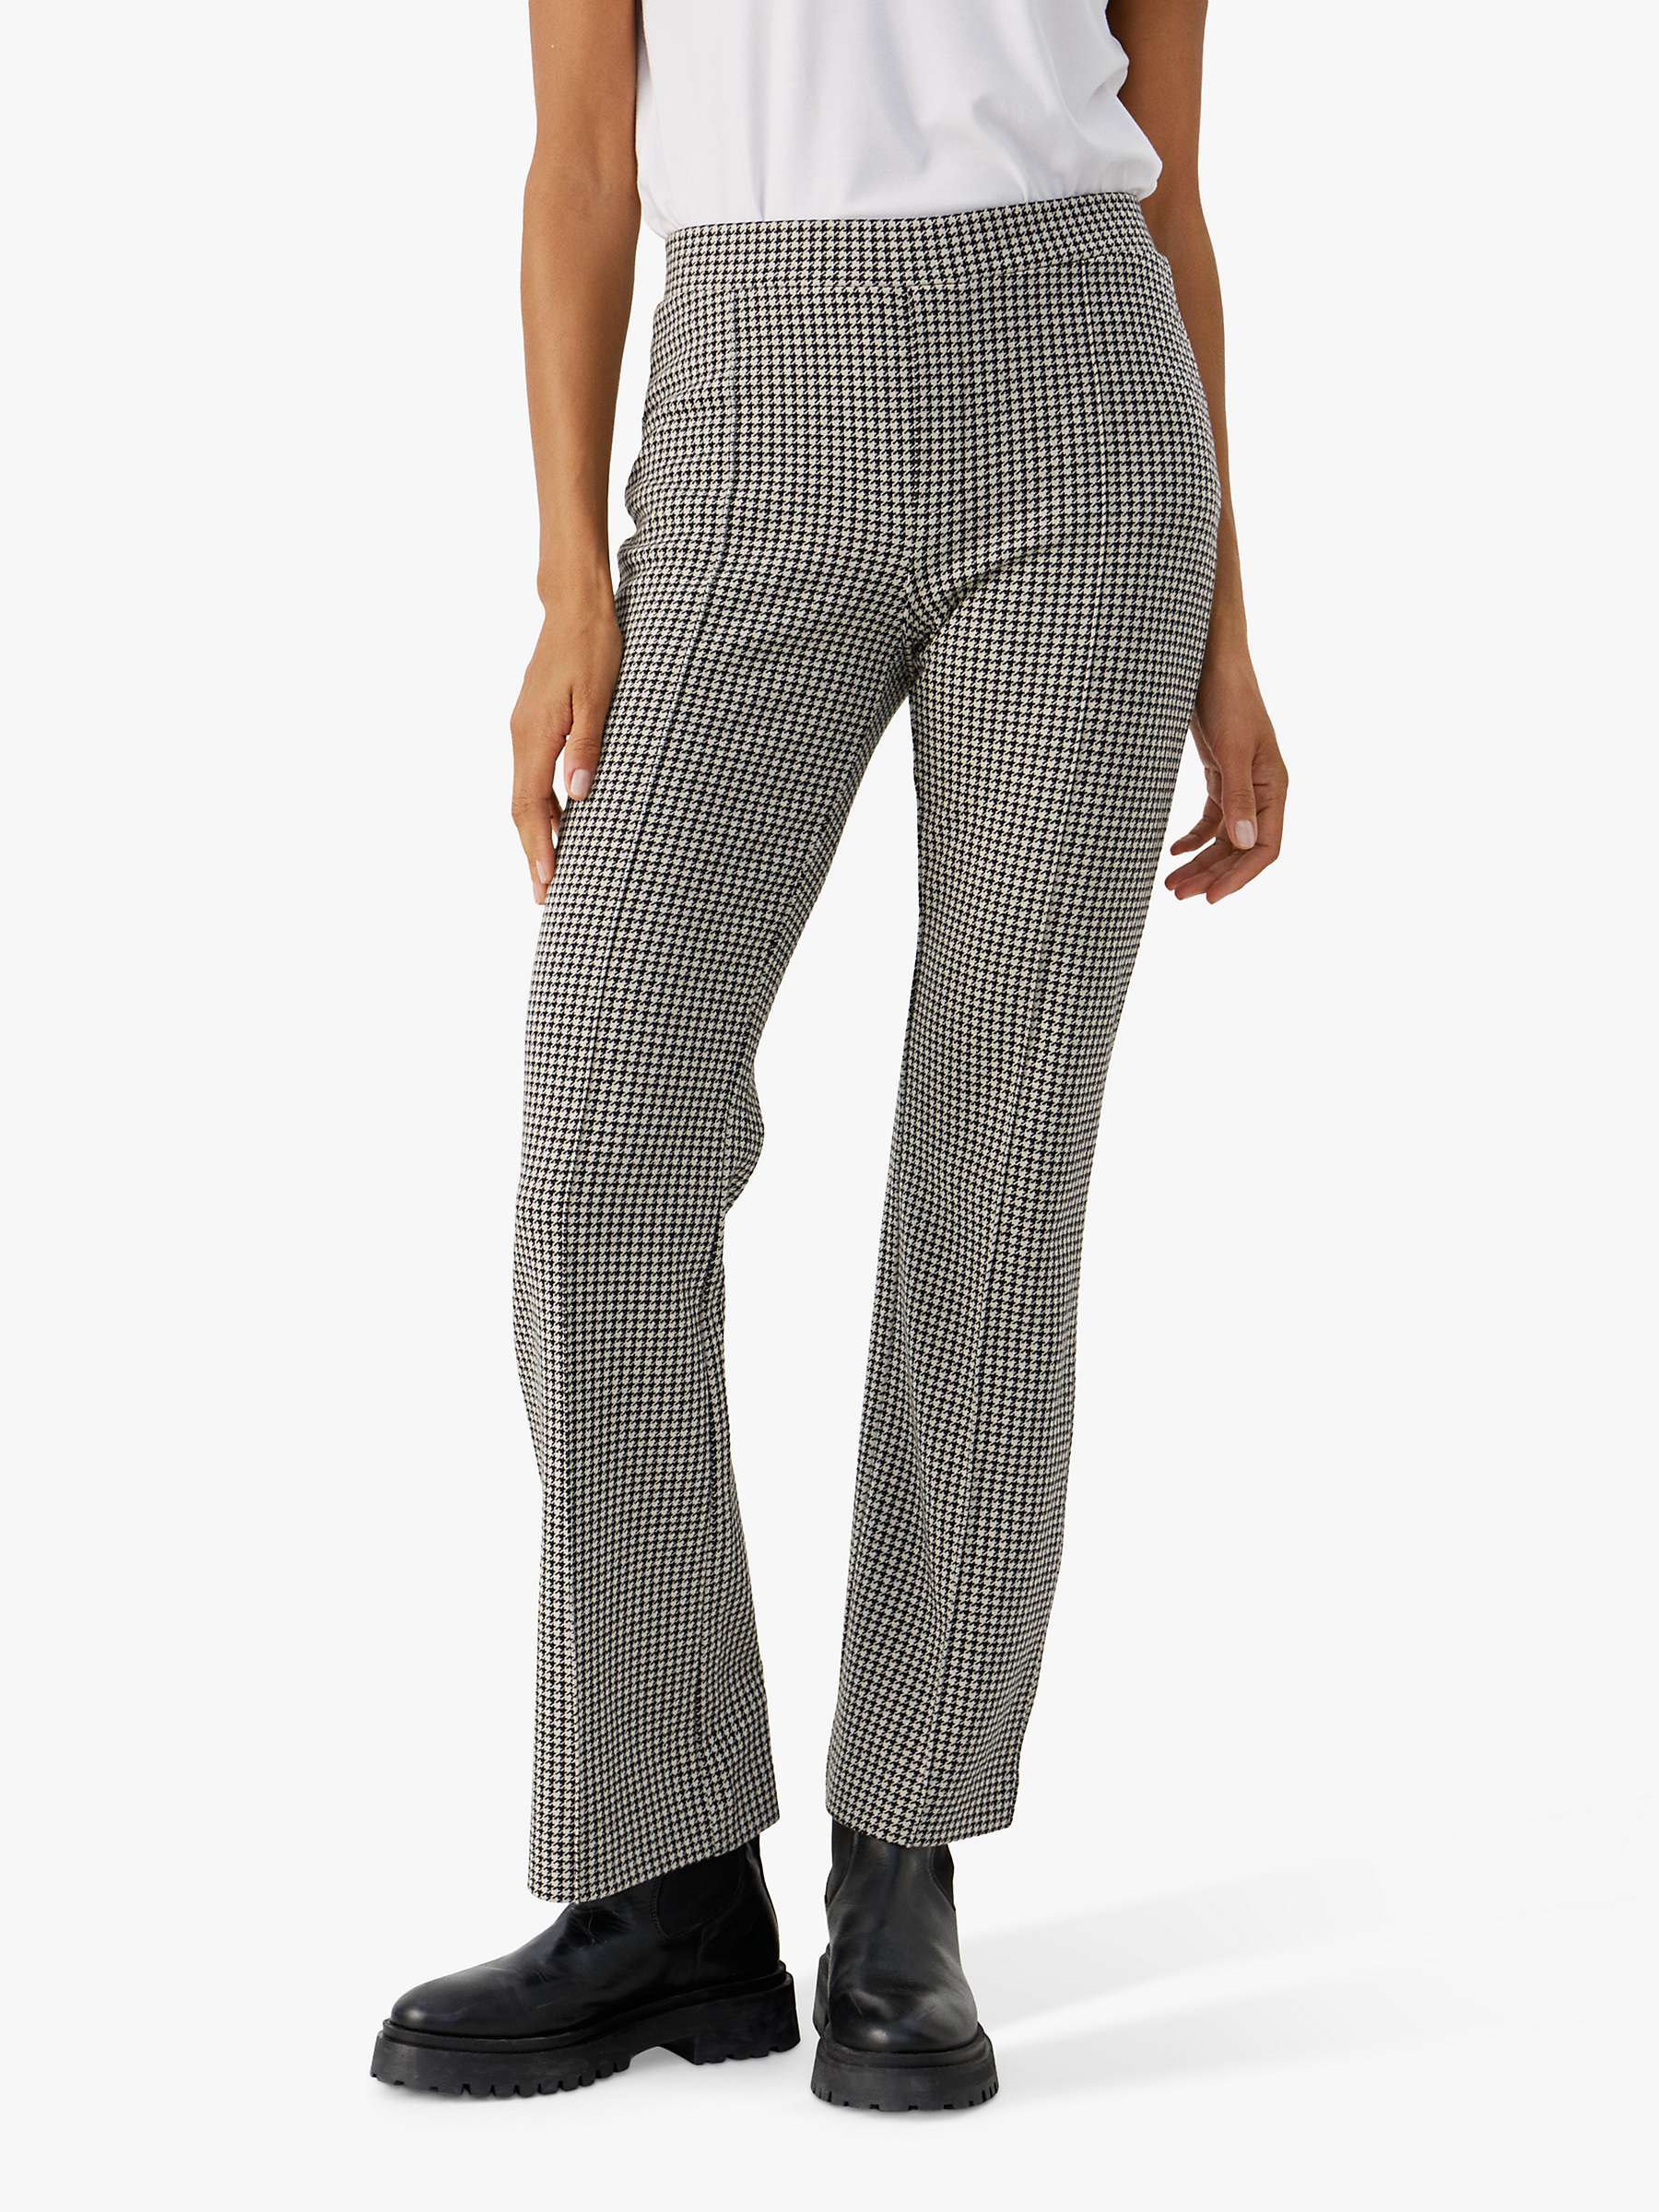 Buy Part Two Pontas Straight Leg Jersey Trousers, Black Houndstooth Online at johnlewis.com